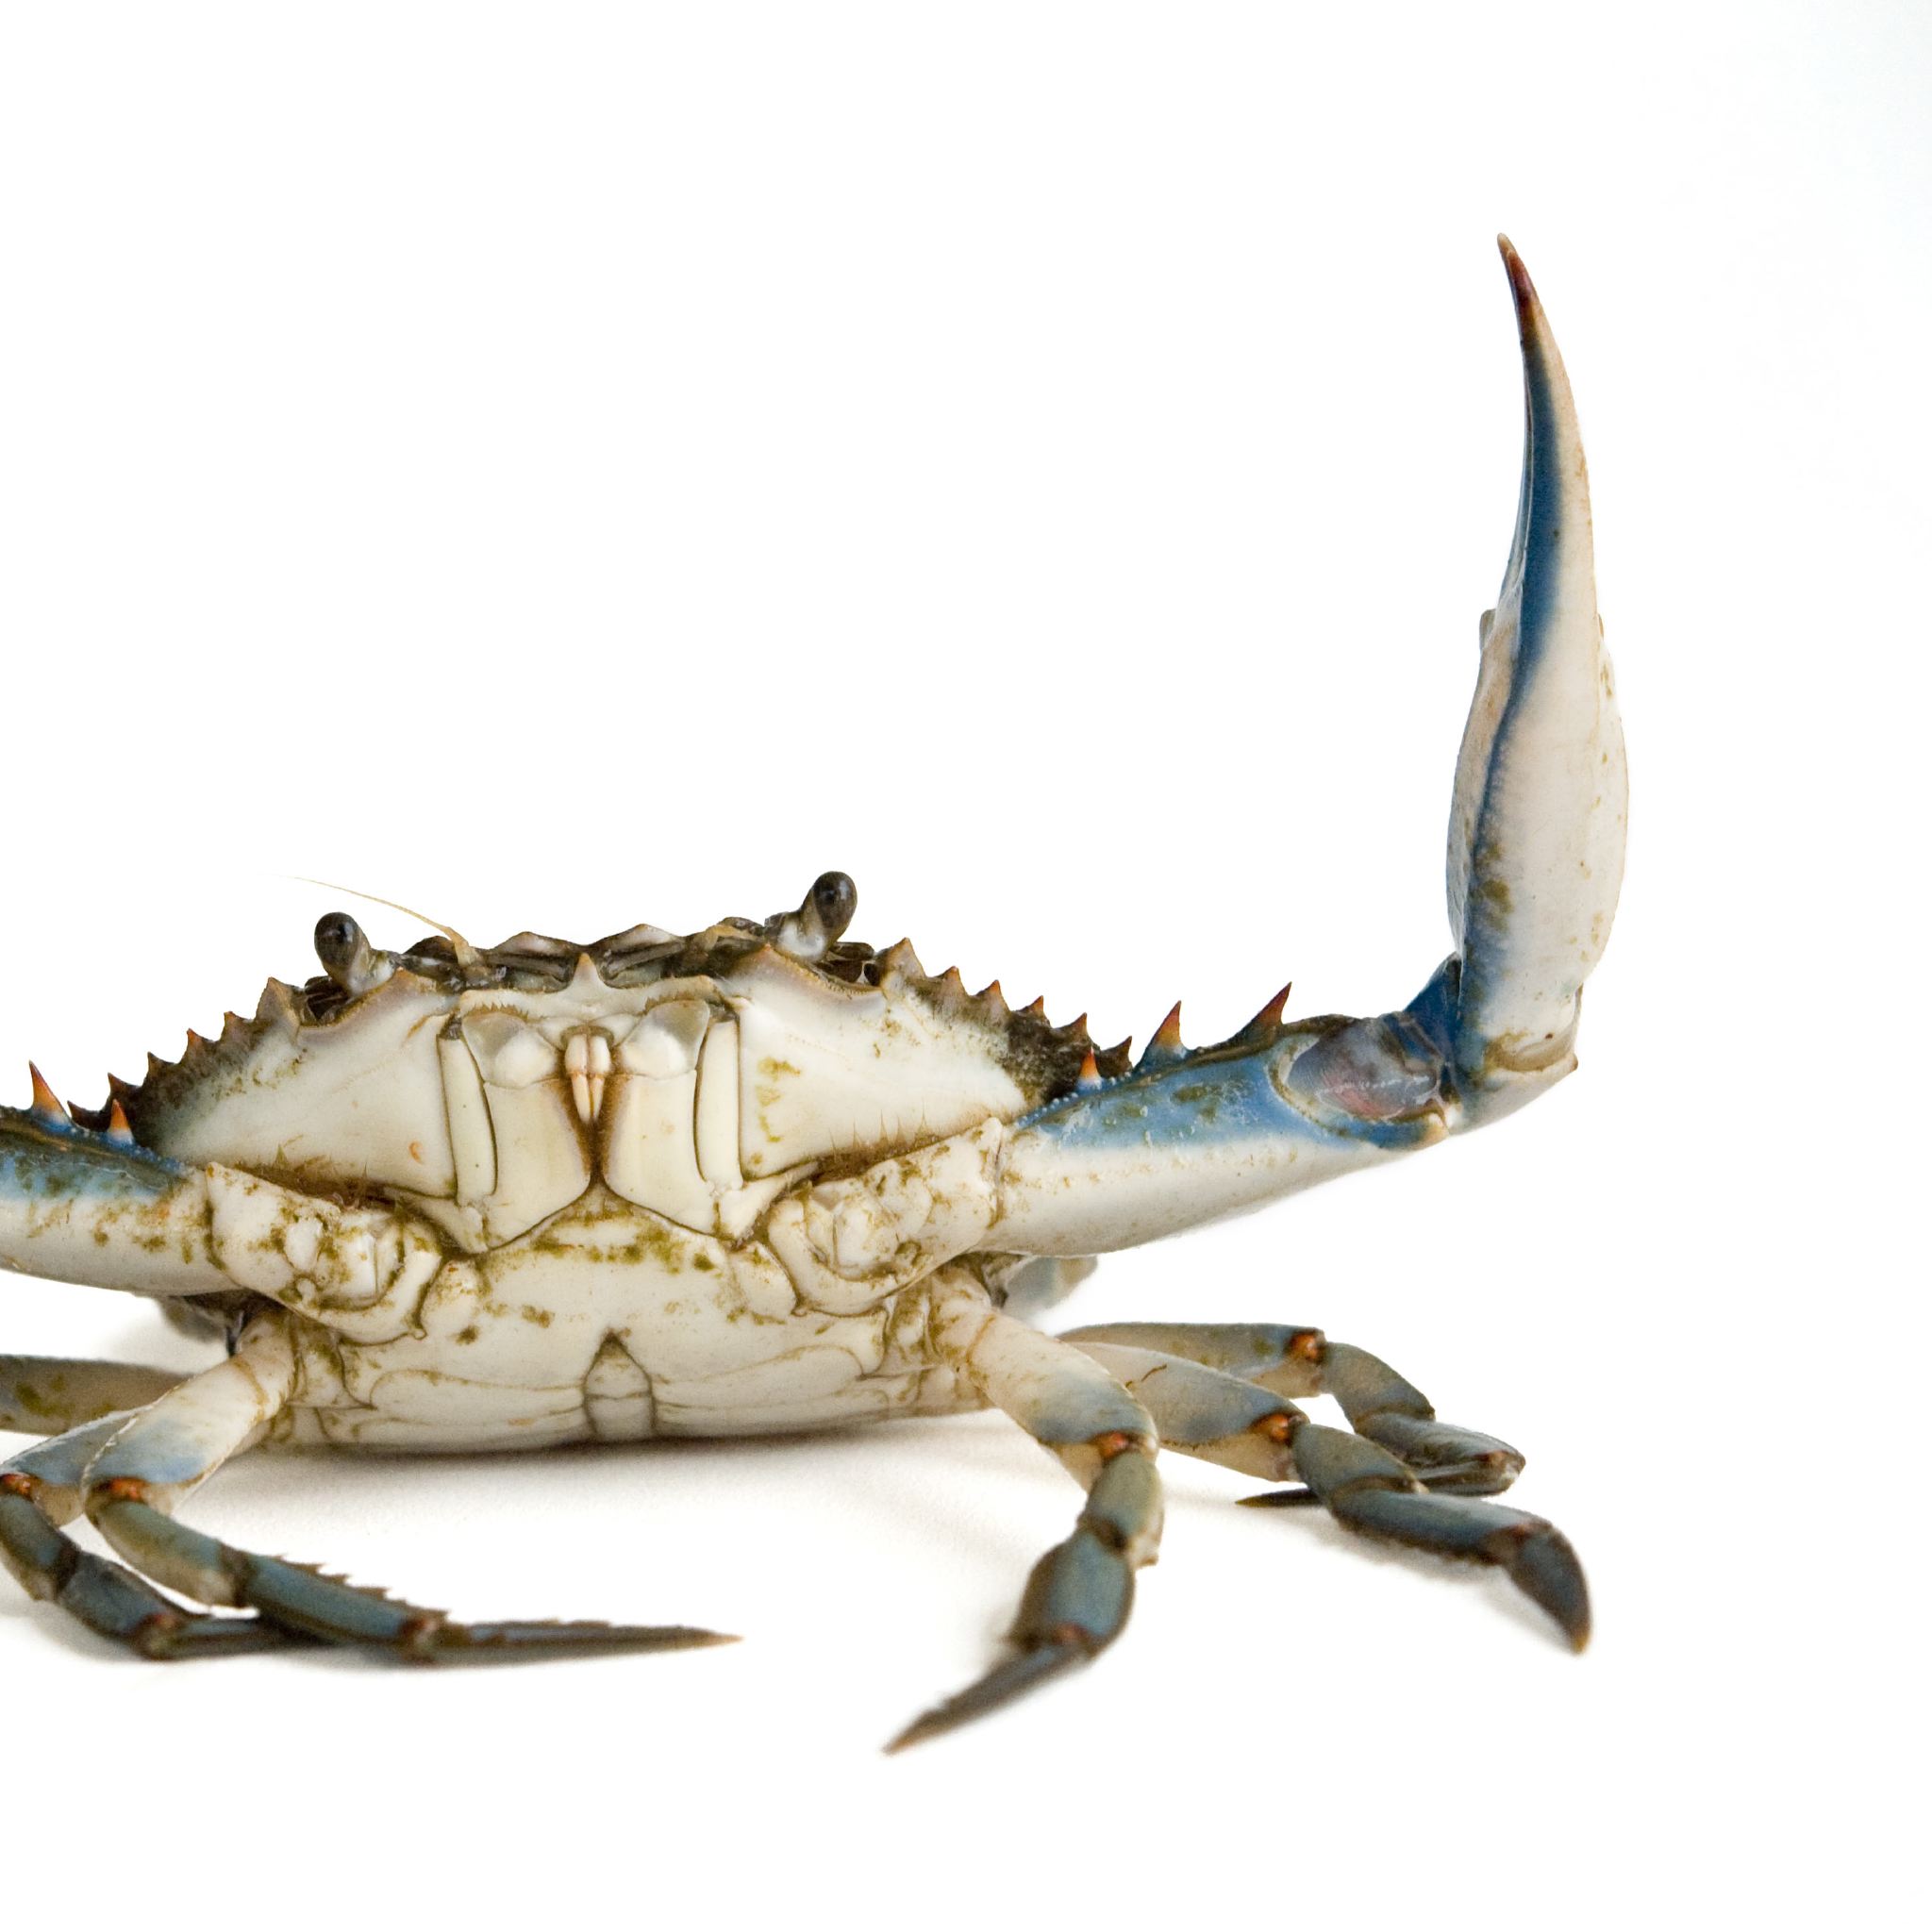 Blue Crab | National Geographic